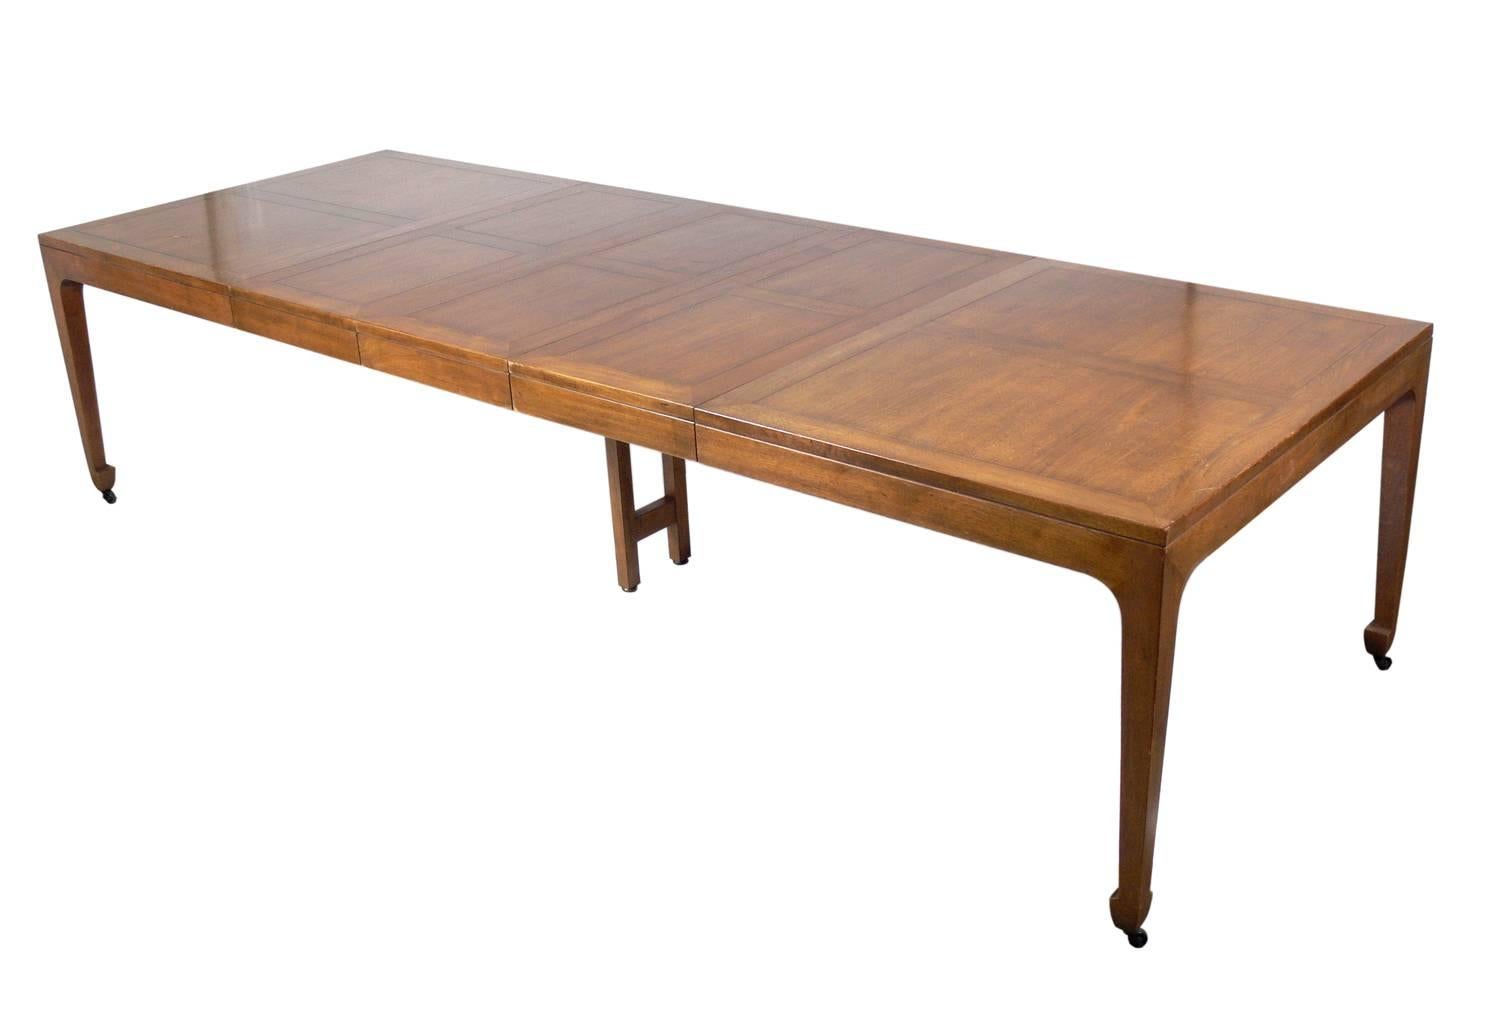 American Asian Influenced Dining Table by Michael Taylor for Baker Seats 6-12